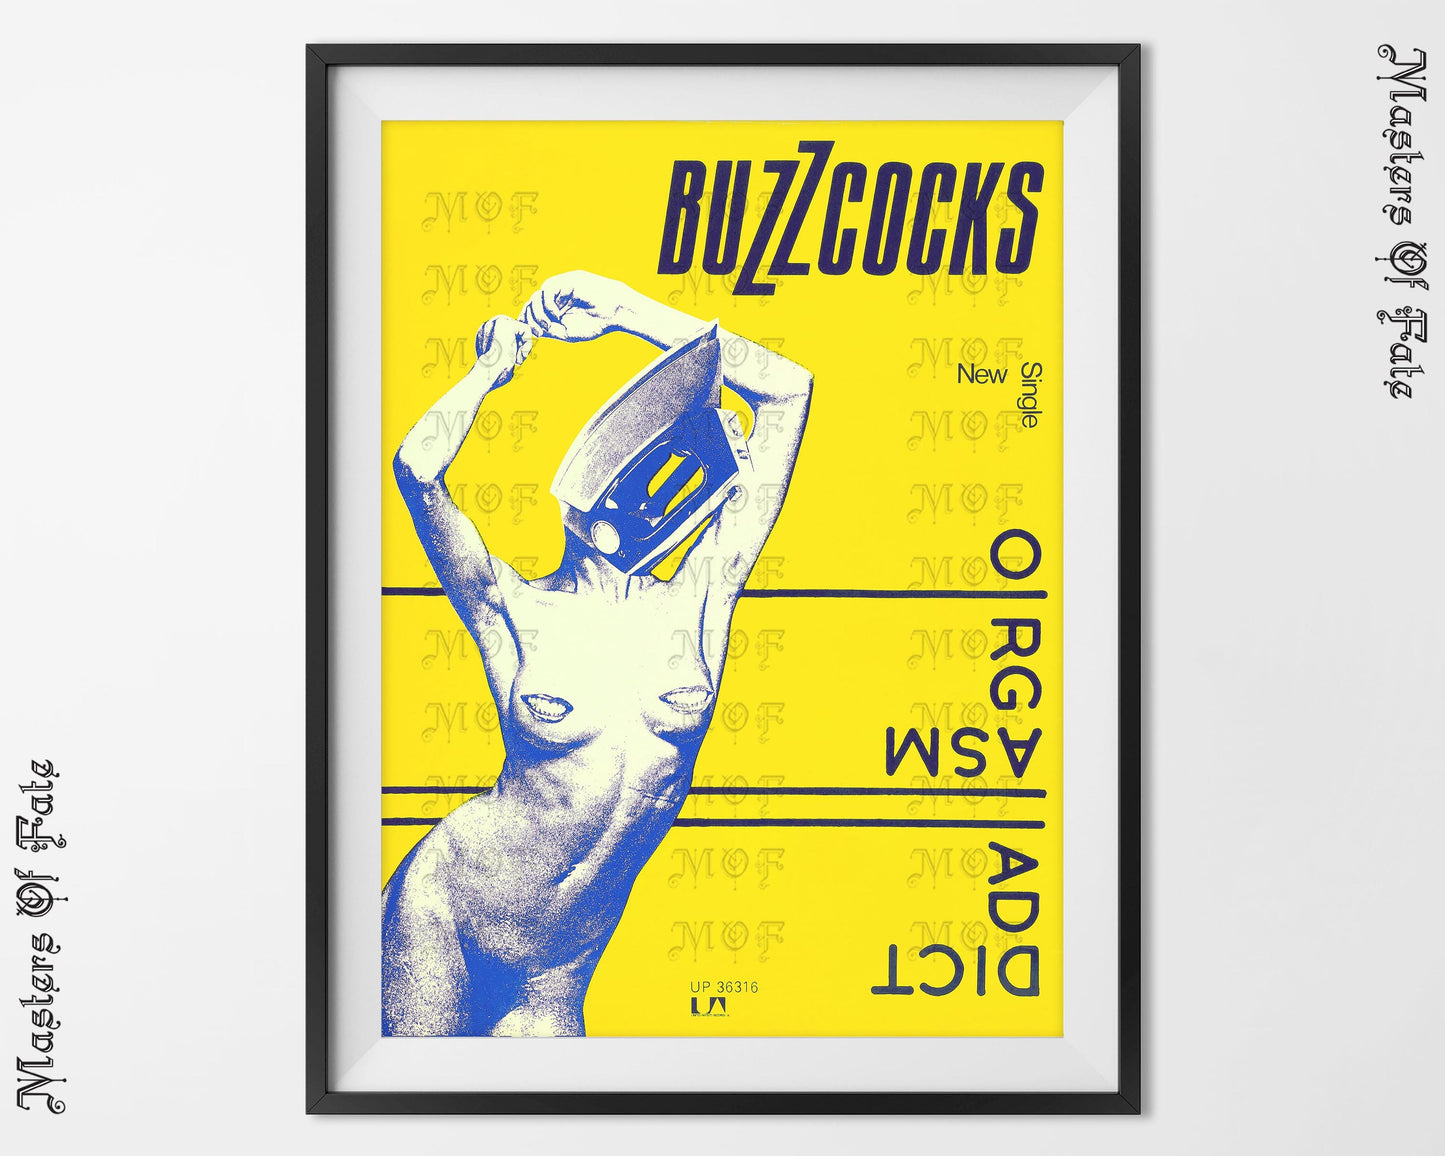 Buzzcocks Concert Poster REMASTERED